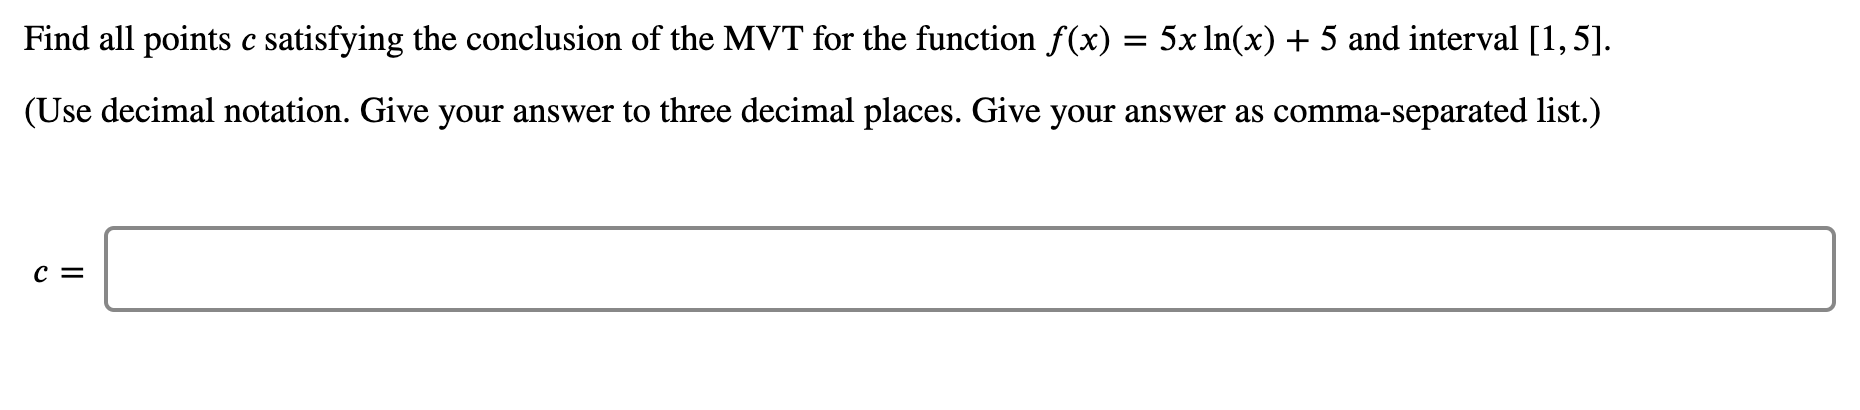 Find all points c satisfying the conclusion of the MVT for the function f(x)
5x In(x) + 5 and interval [1,5].
(Use decimal notation. Give your answer to three decimal places. Give your answer as comma-separated list.)
c =
